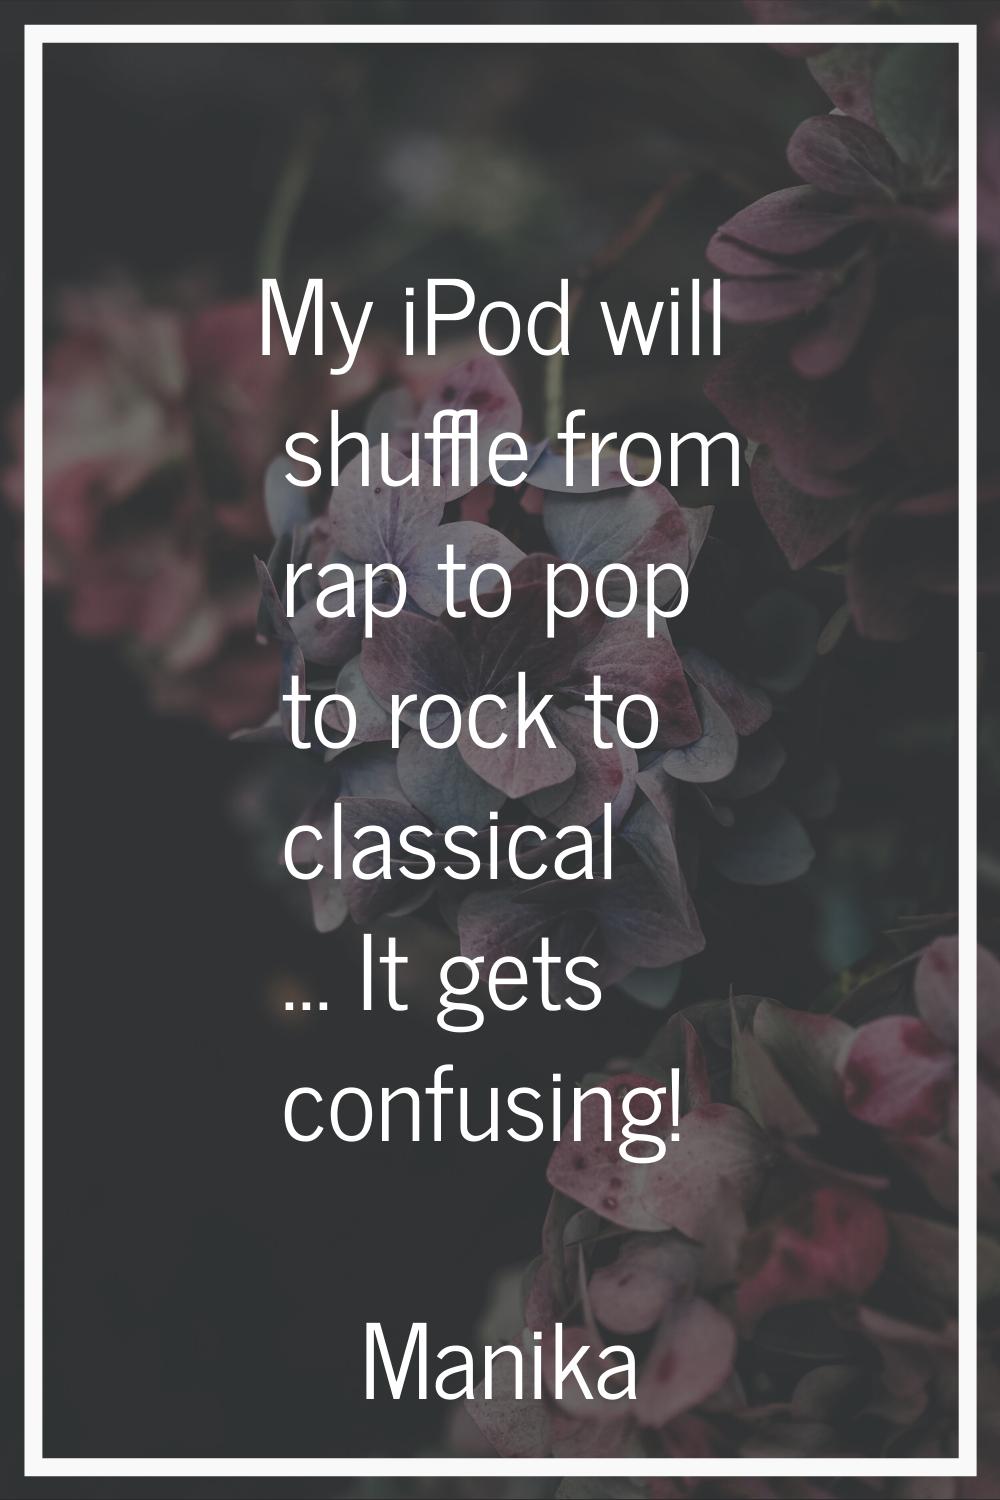 My iPod will shuffle from rap to pop to rock to classical ... It gets confusing!